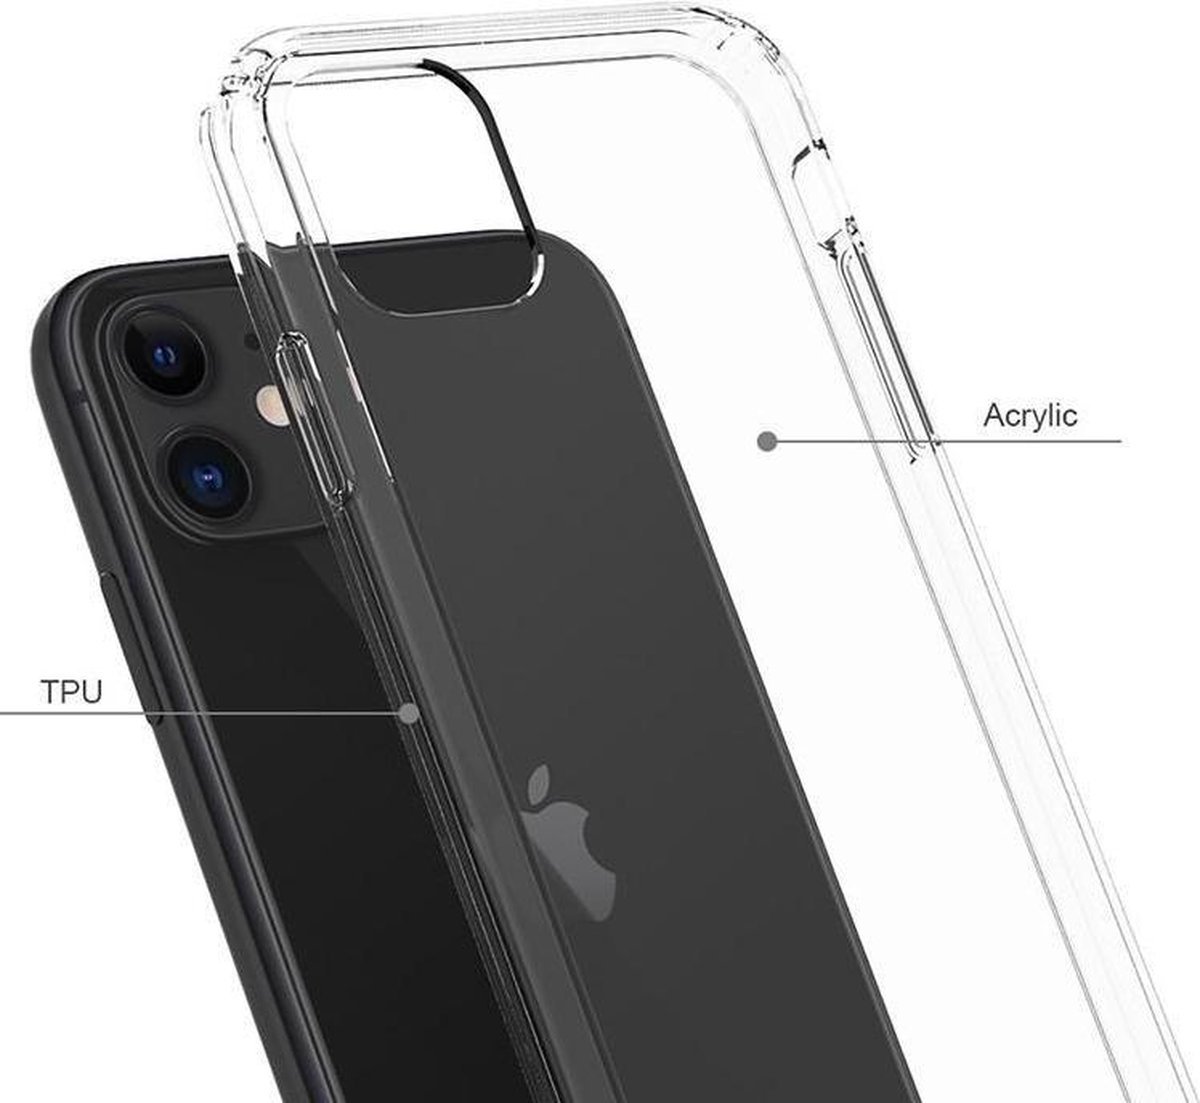 4mobilez Iphone 11 hoesje transparant + glas protector 5D Edge-to-Edge